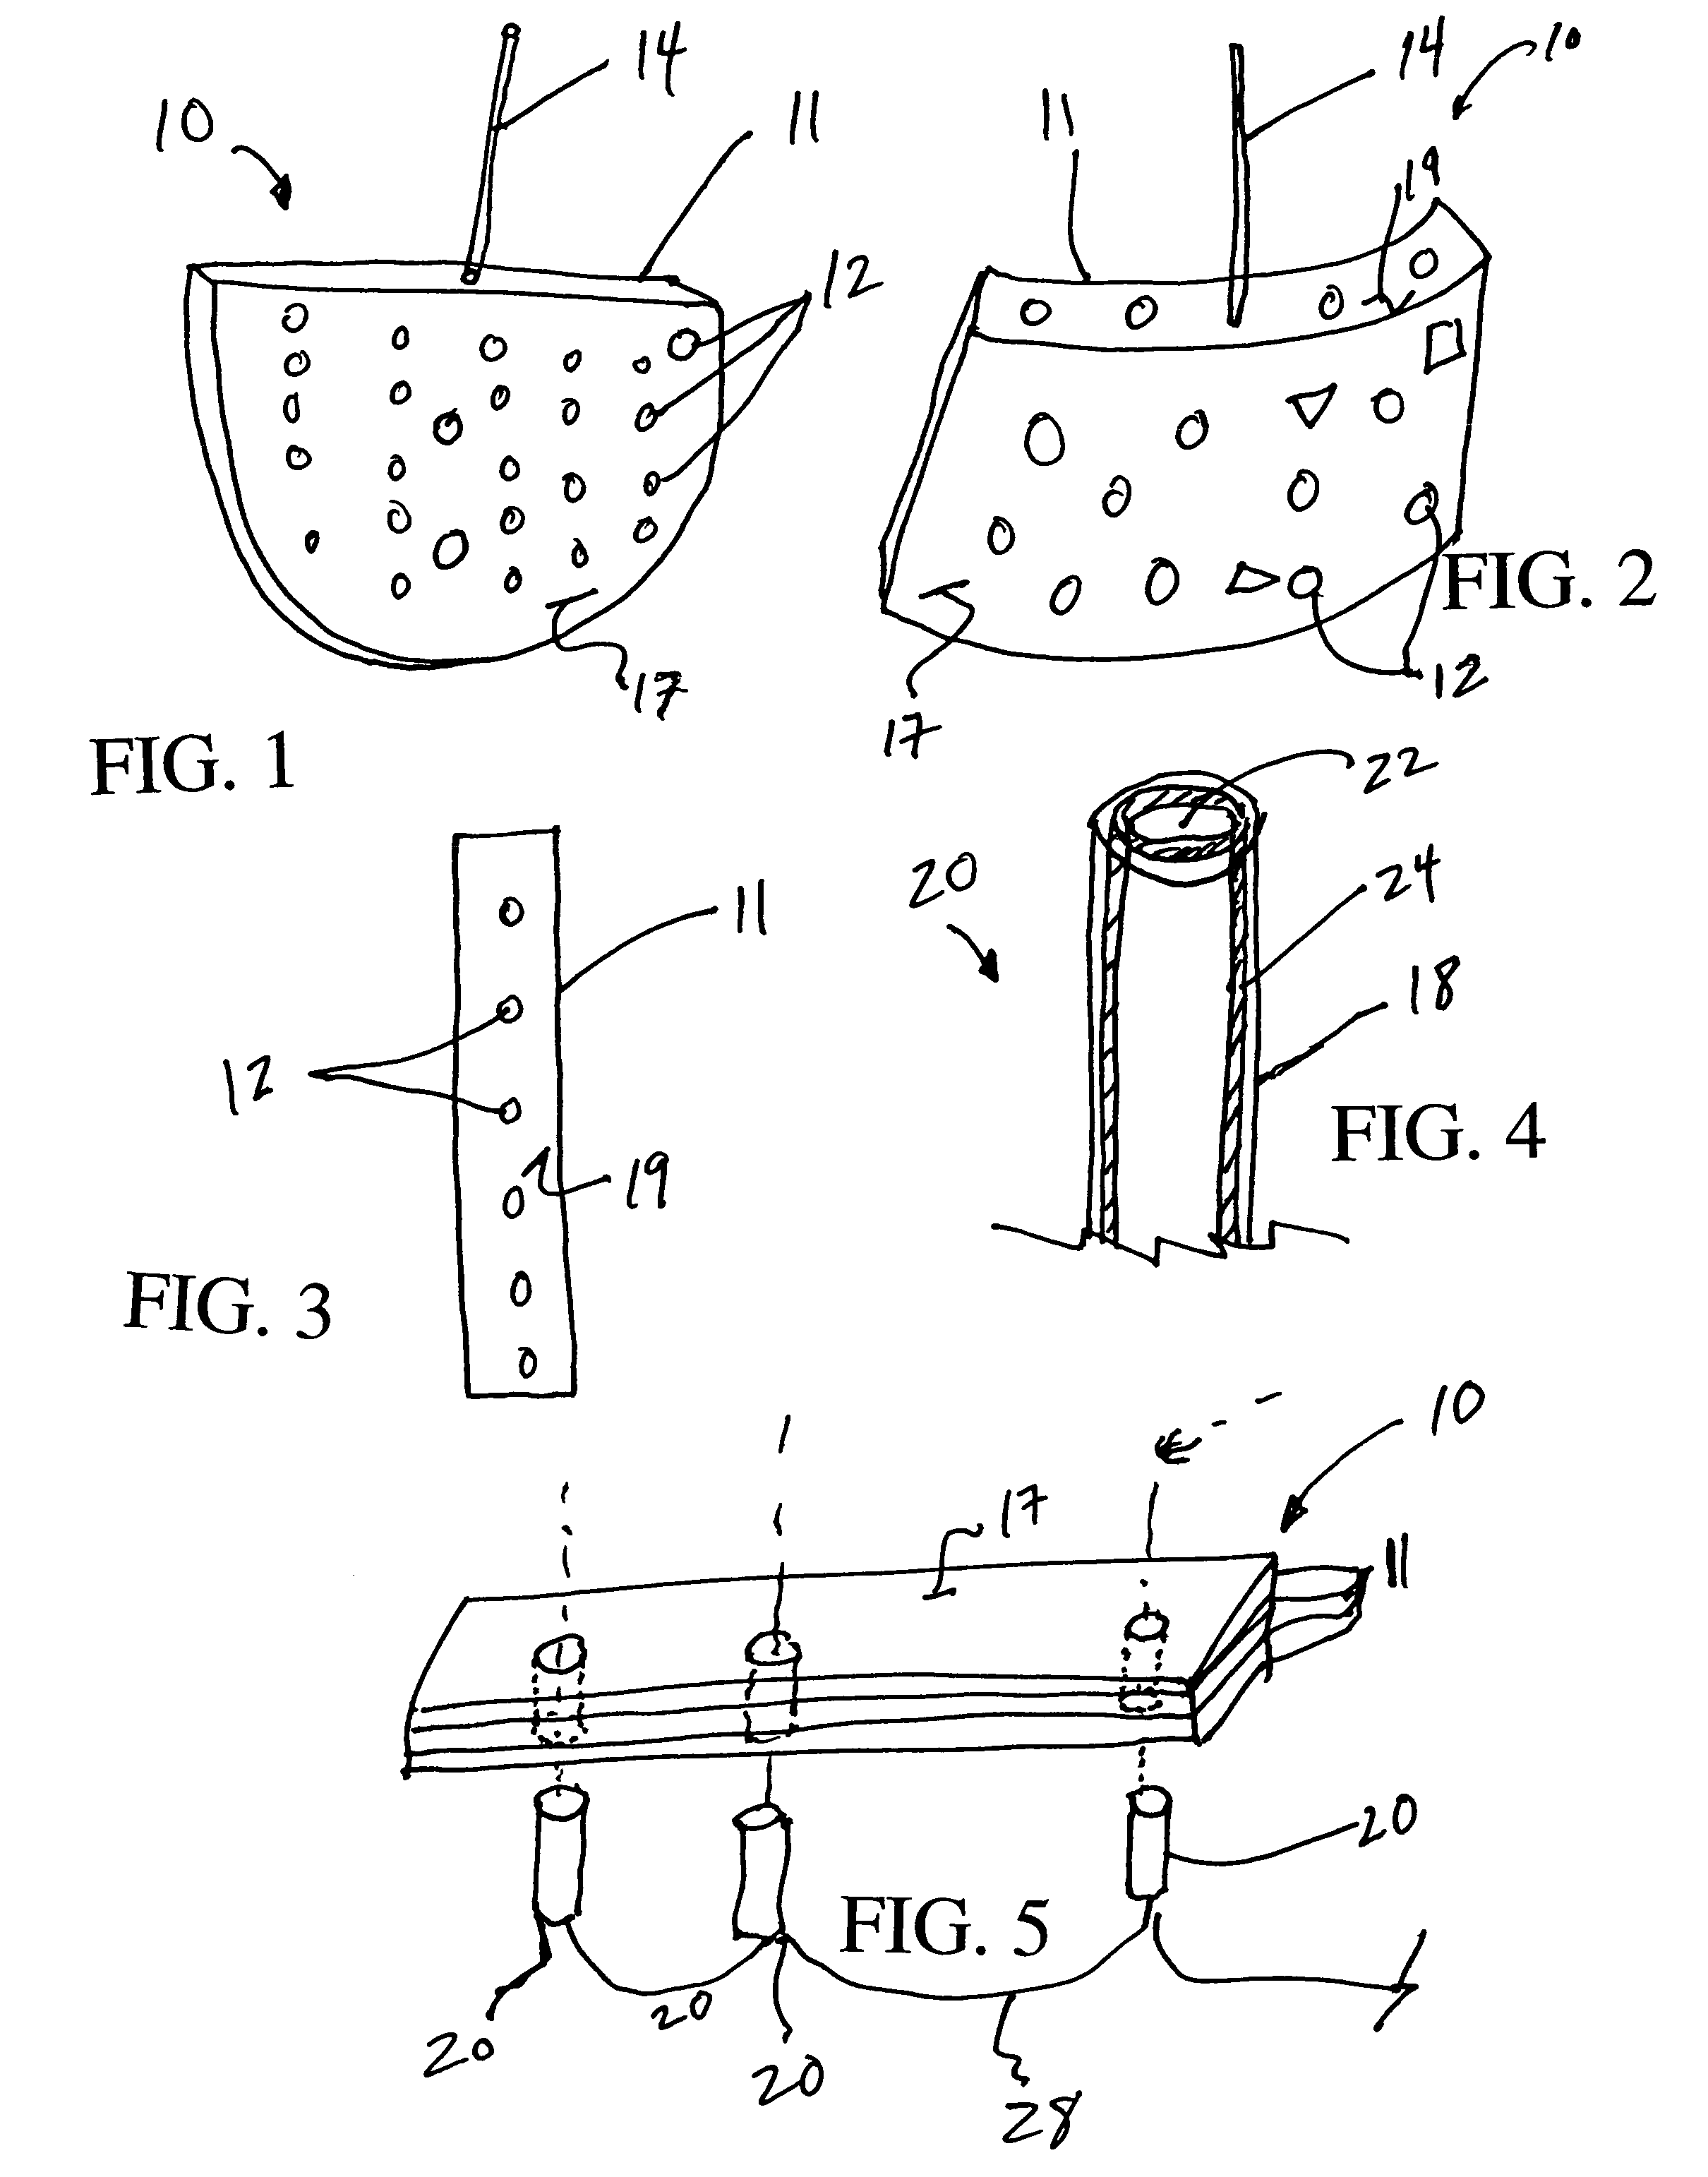 Advanced valve metal anodes with complex interior and surface features and methods for processing same